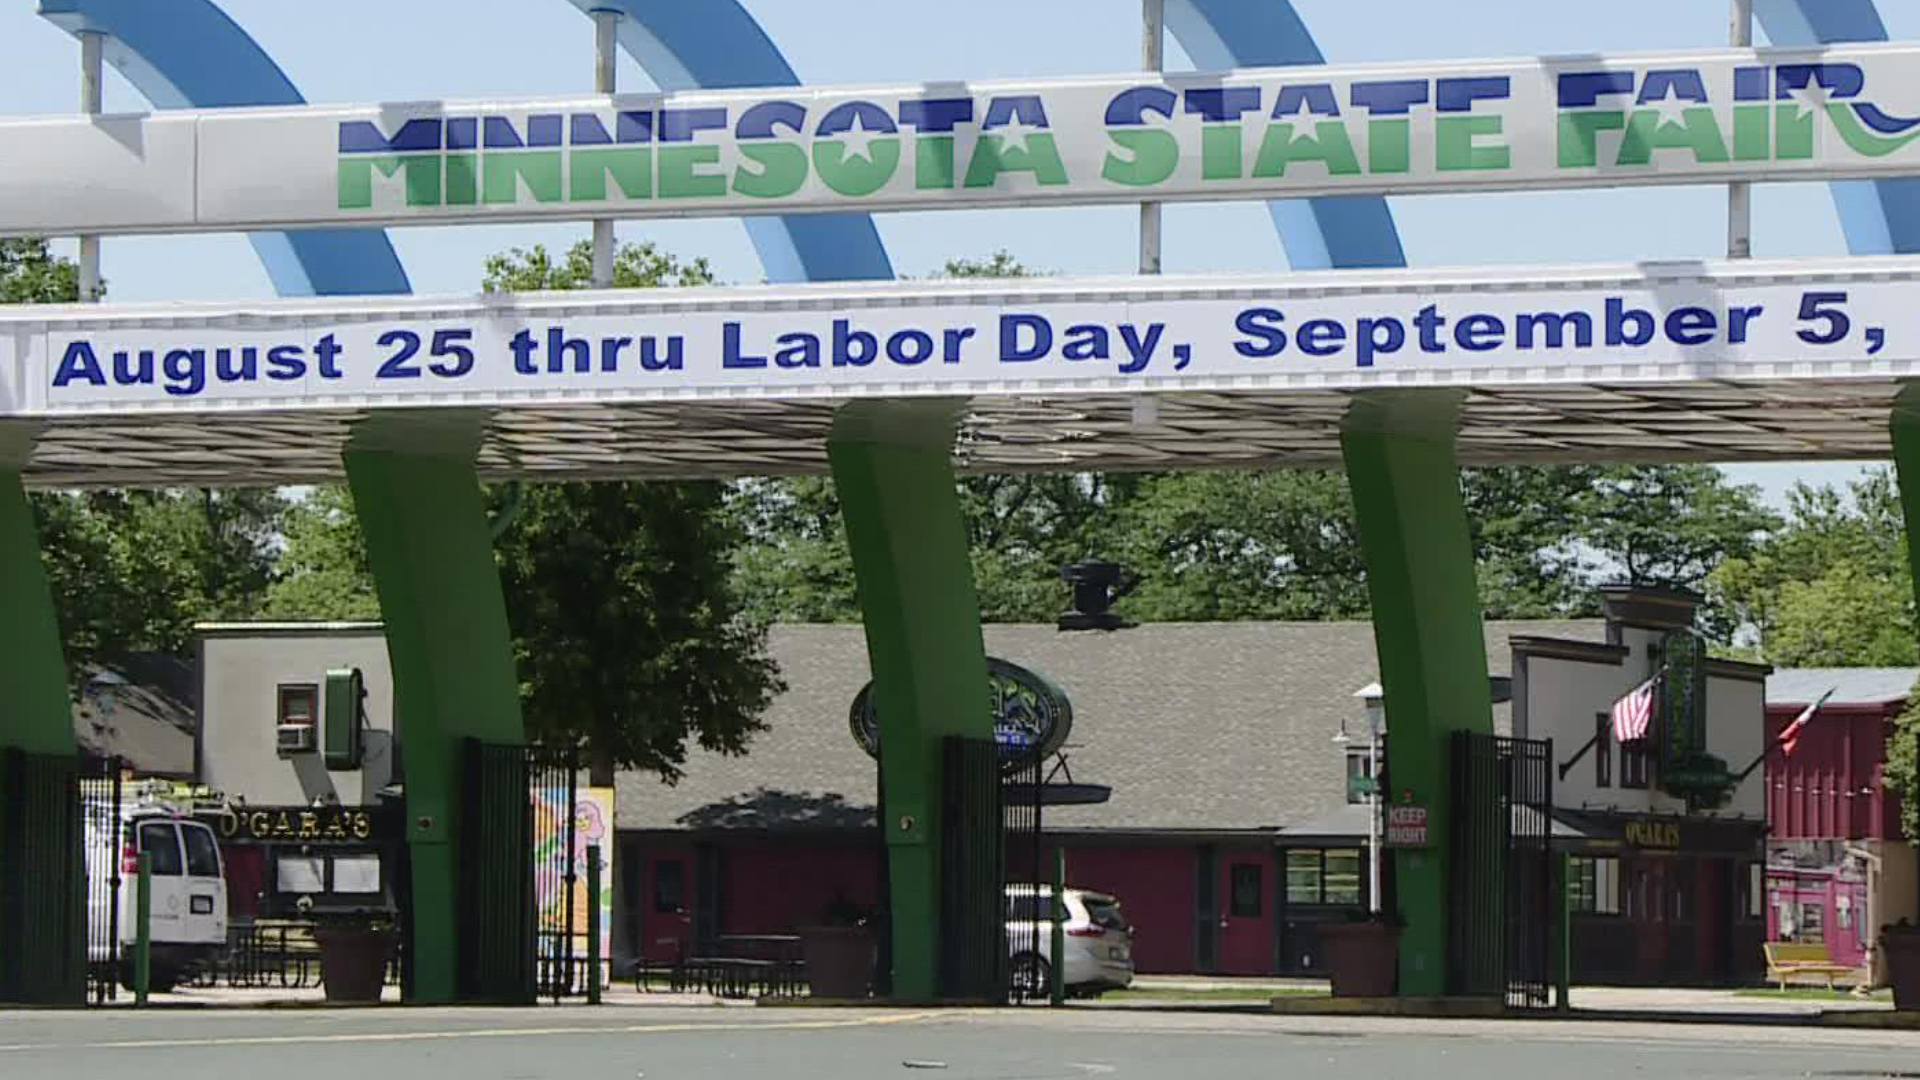 The Minnesota State Fair held a job event Wednesday, looking to hire over 1,000 people to fill positions before its gates open next month.